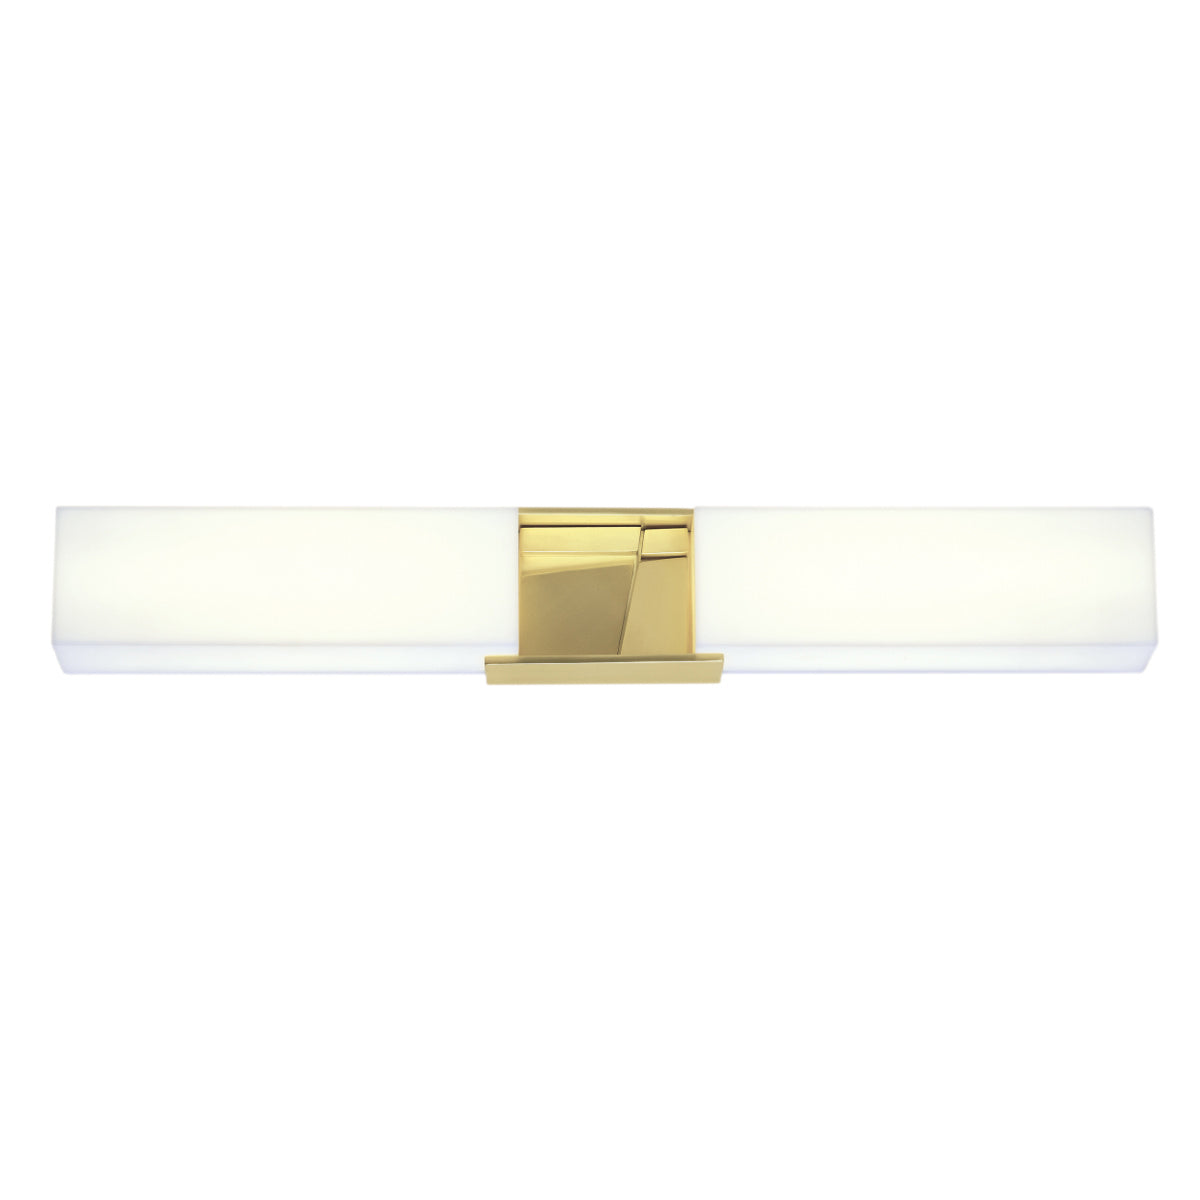 Artemis LED Wall Sconce in Satin Brass